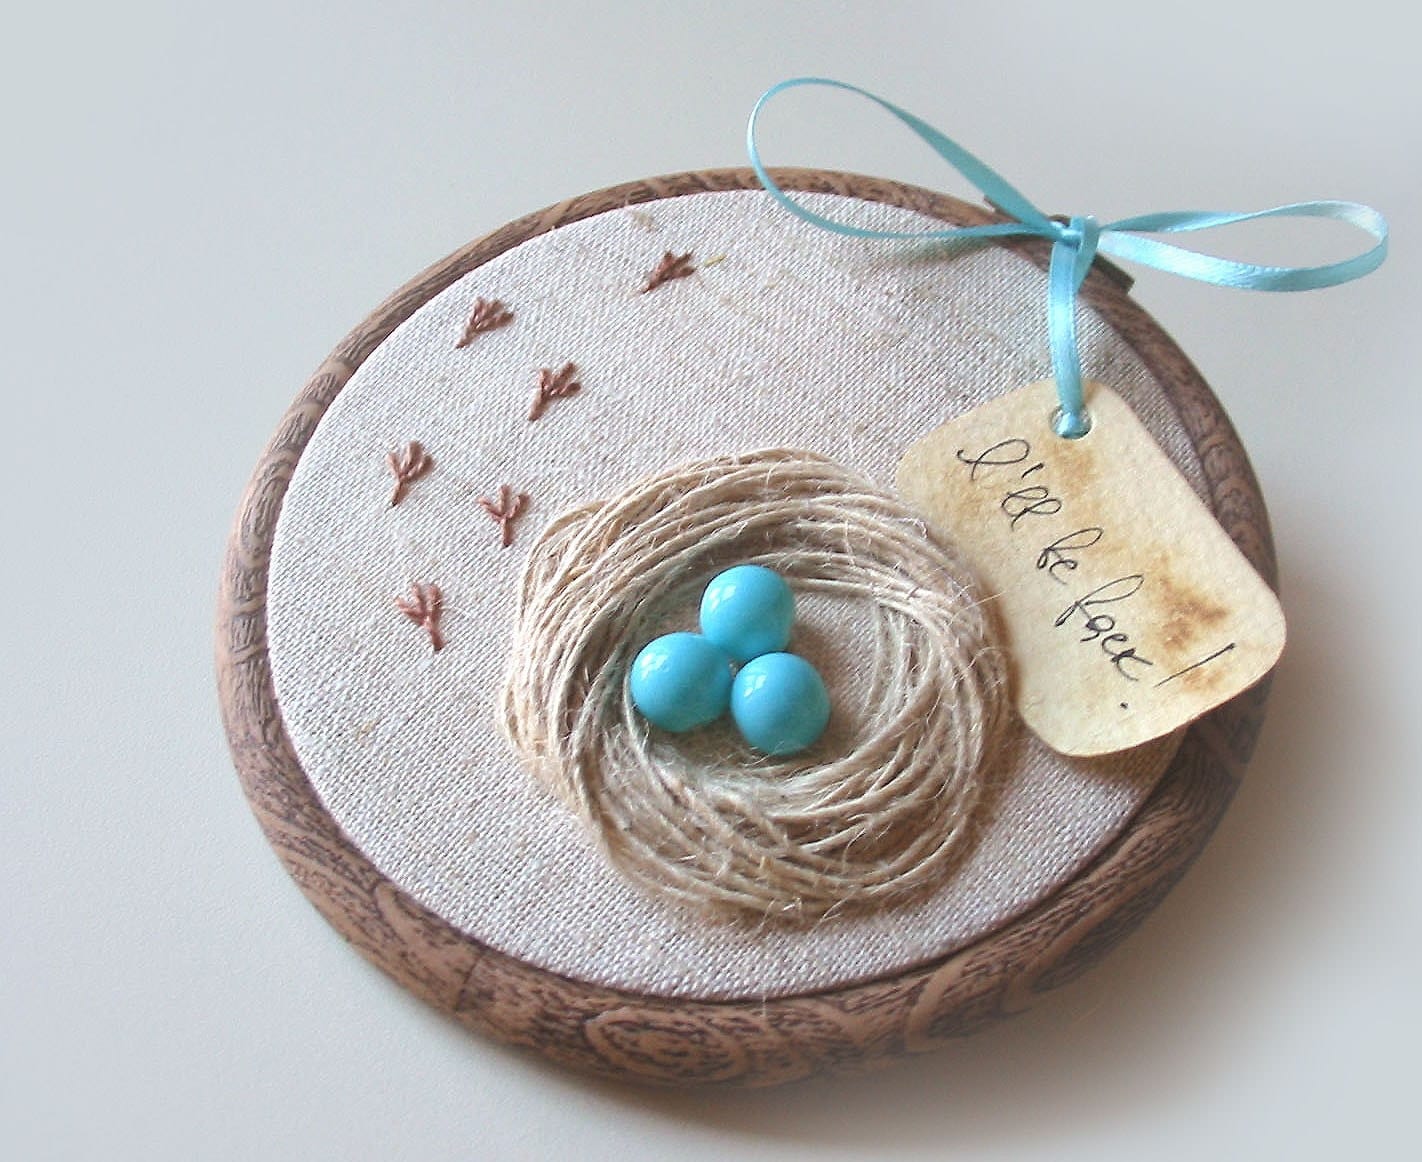 Organic Hand Embroidered Wall Hanging Nest with Robin Eggs- I WILL BE BACK - Free Worldwide Shipping